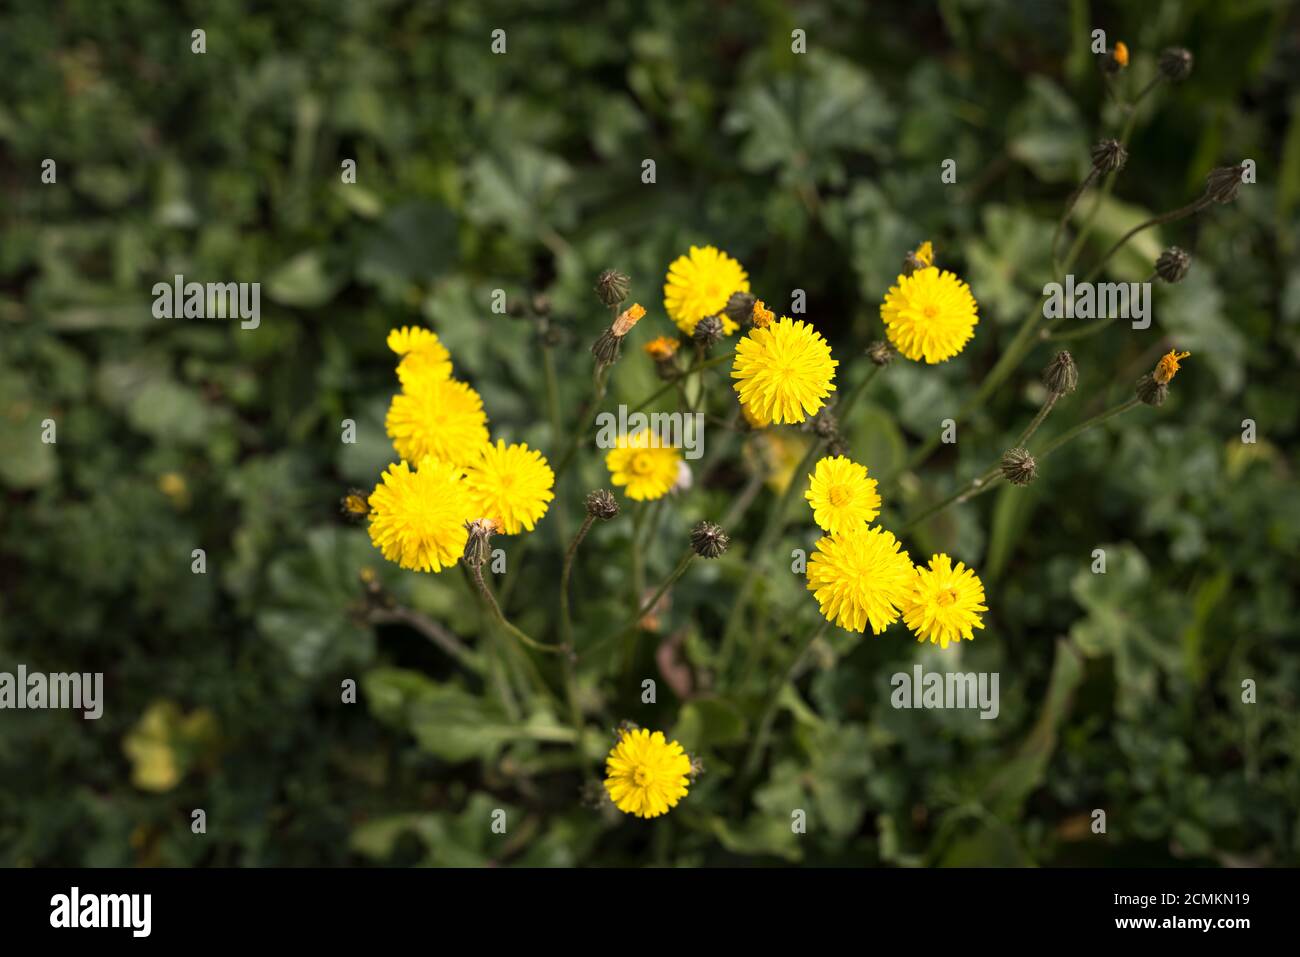 Tiny yellow flowers in a wild small bush with green leaves Stock Photo